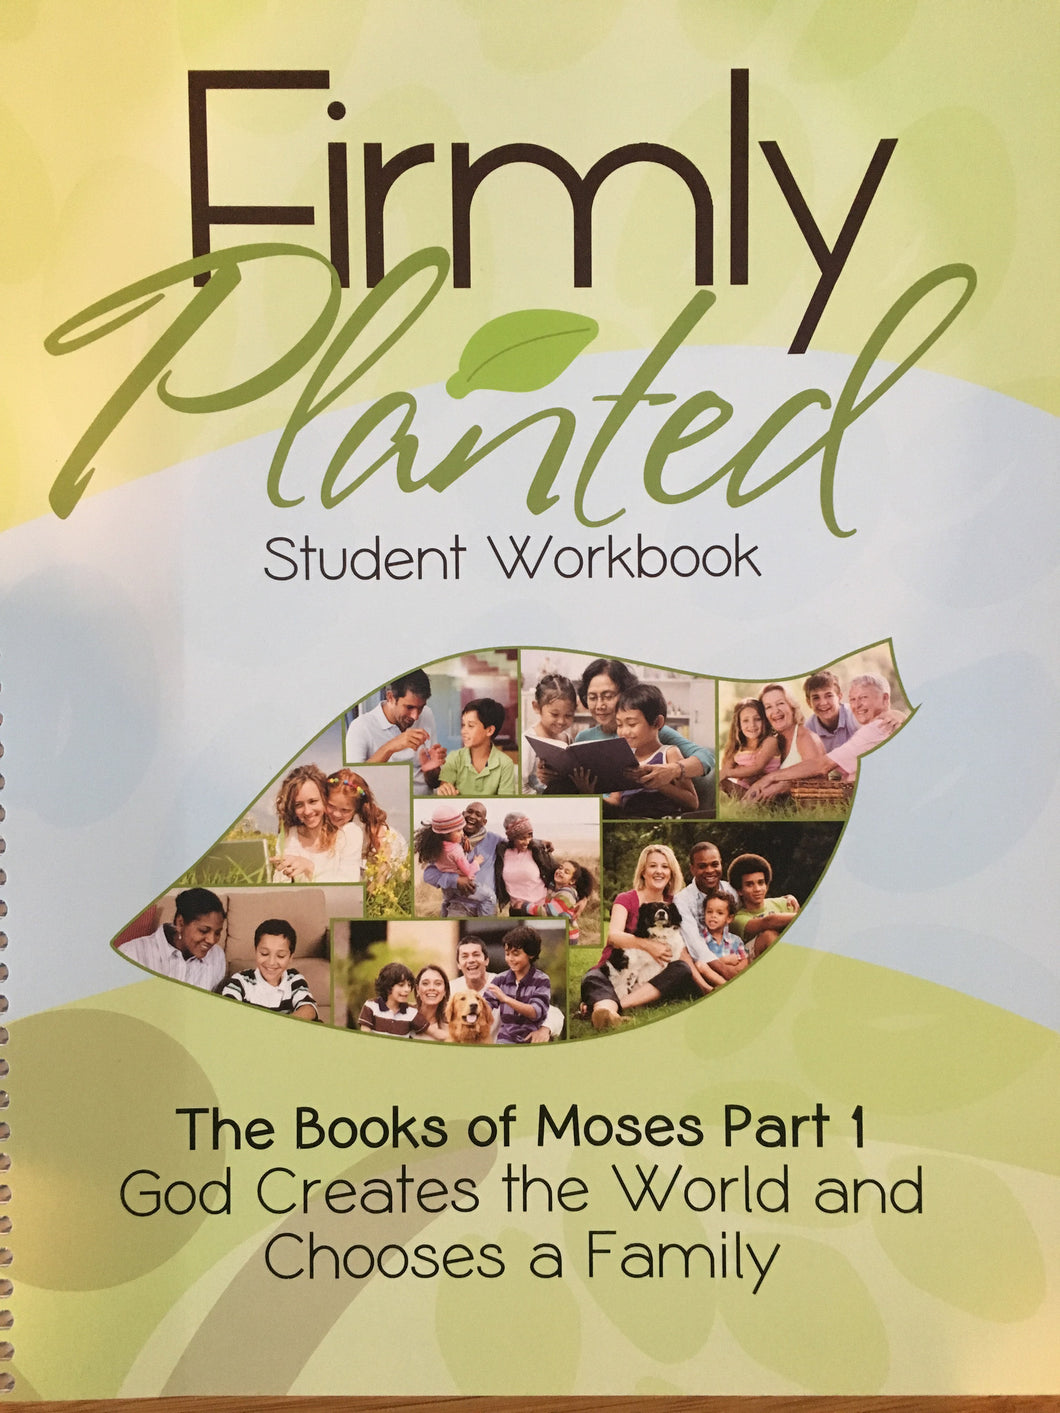 The Books of Moses Part 1 Workbook